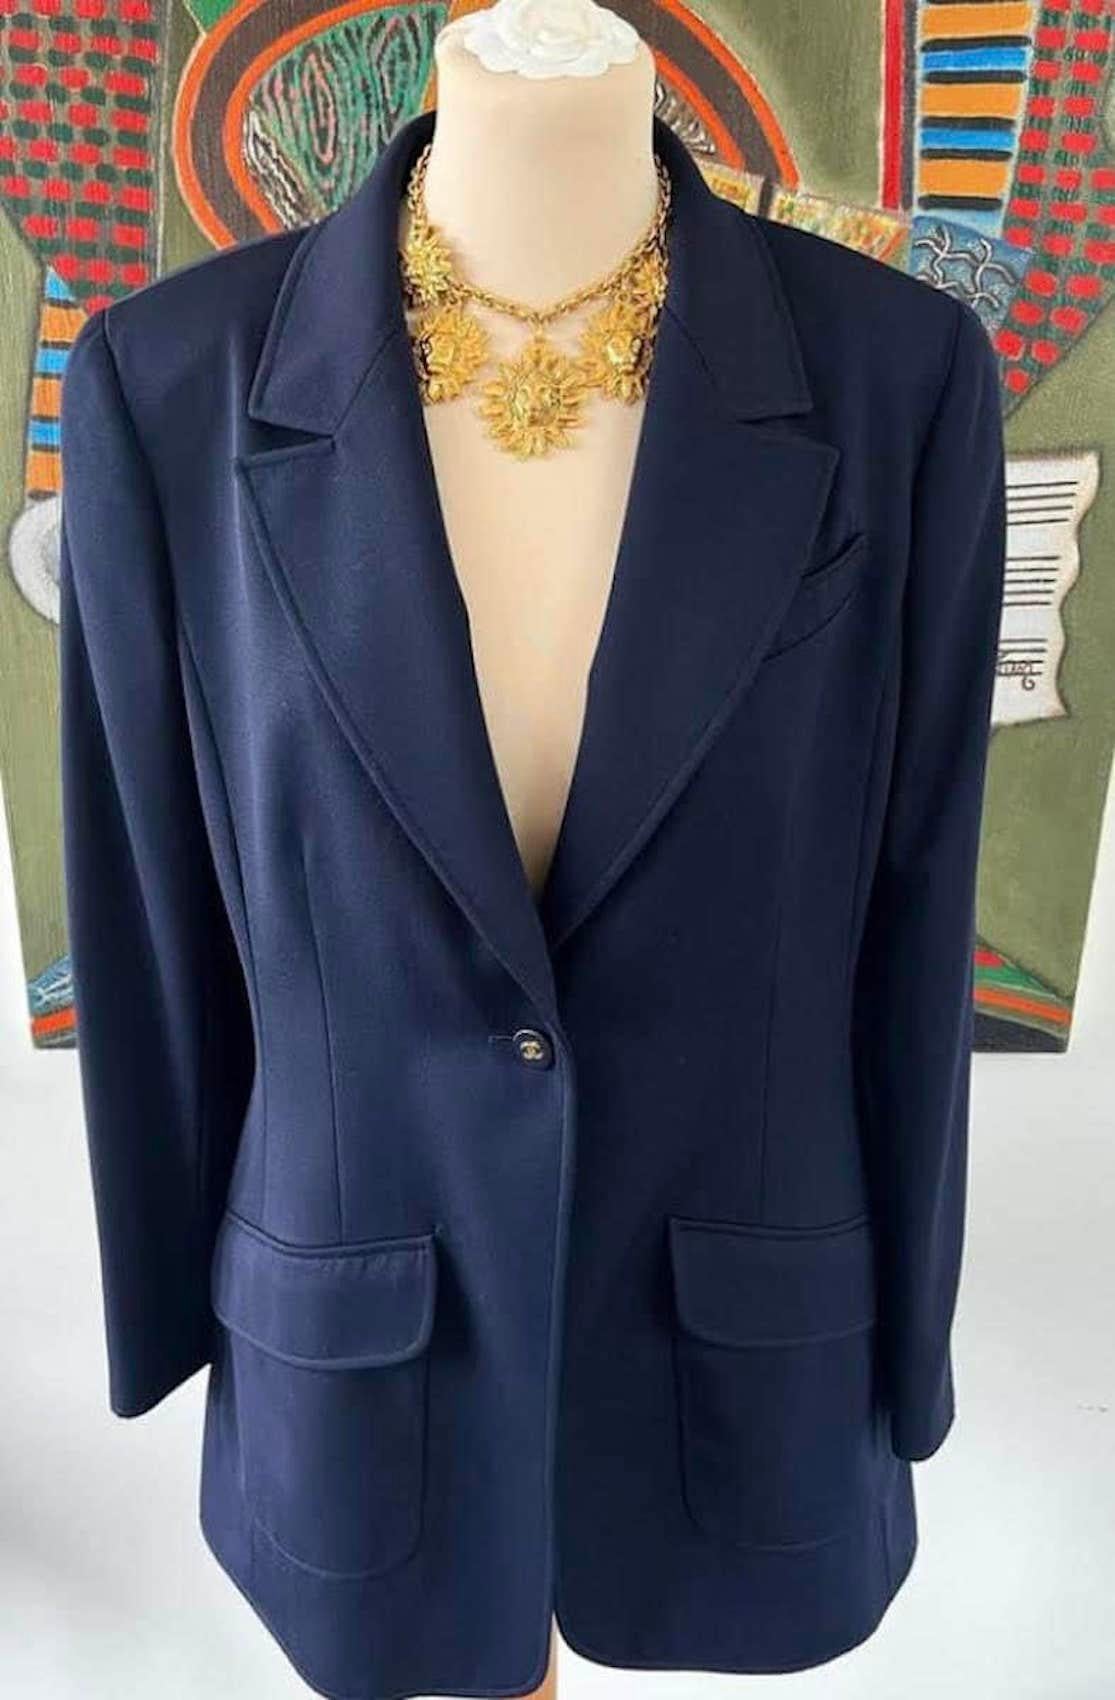 CHANEL 1997 Navy Blue Wool Blazer CC Logo Button Single Breasted Jacket
It is a beautiful very rare, classic and elegant CHANEL navy blazer-jacket from Spring 1997, never worn with tag. It  is handcrafted from 100% wool and silk lining with cc logo.